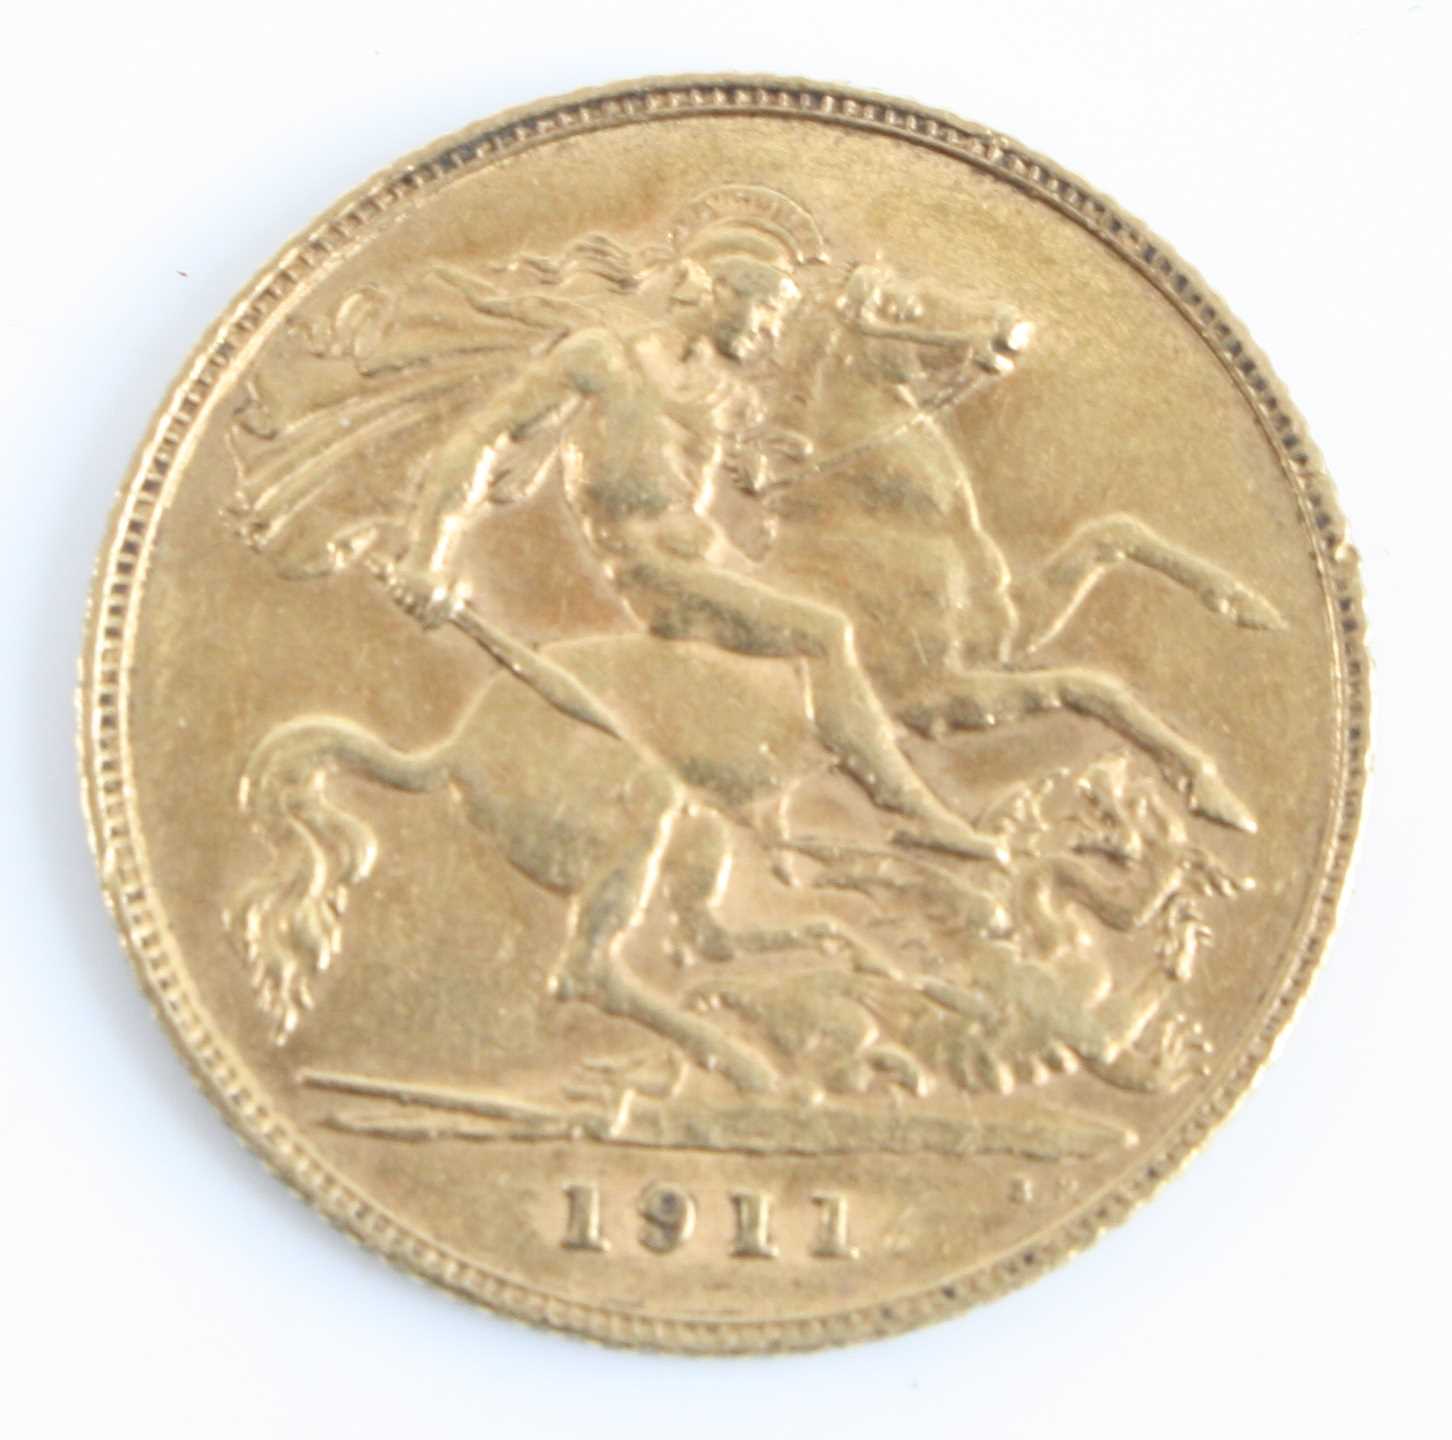 Great Britain, 1911 gold half sovereign, George V, rev: St George and Dragon above date. (1) - Image 2 of 2